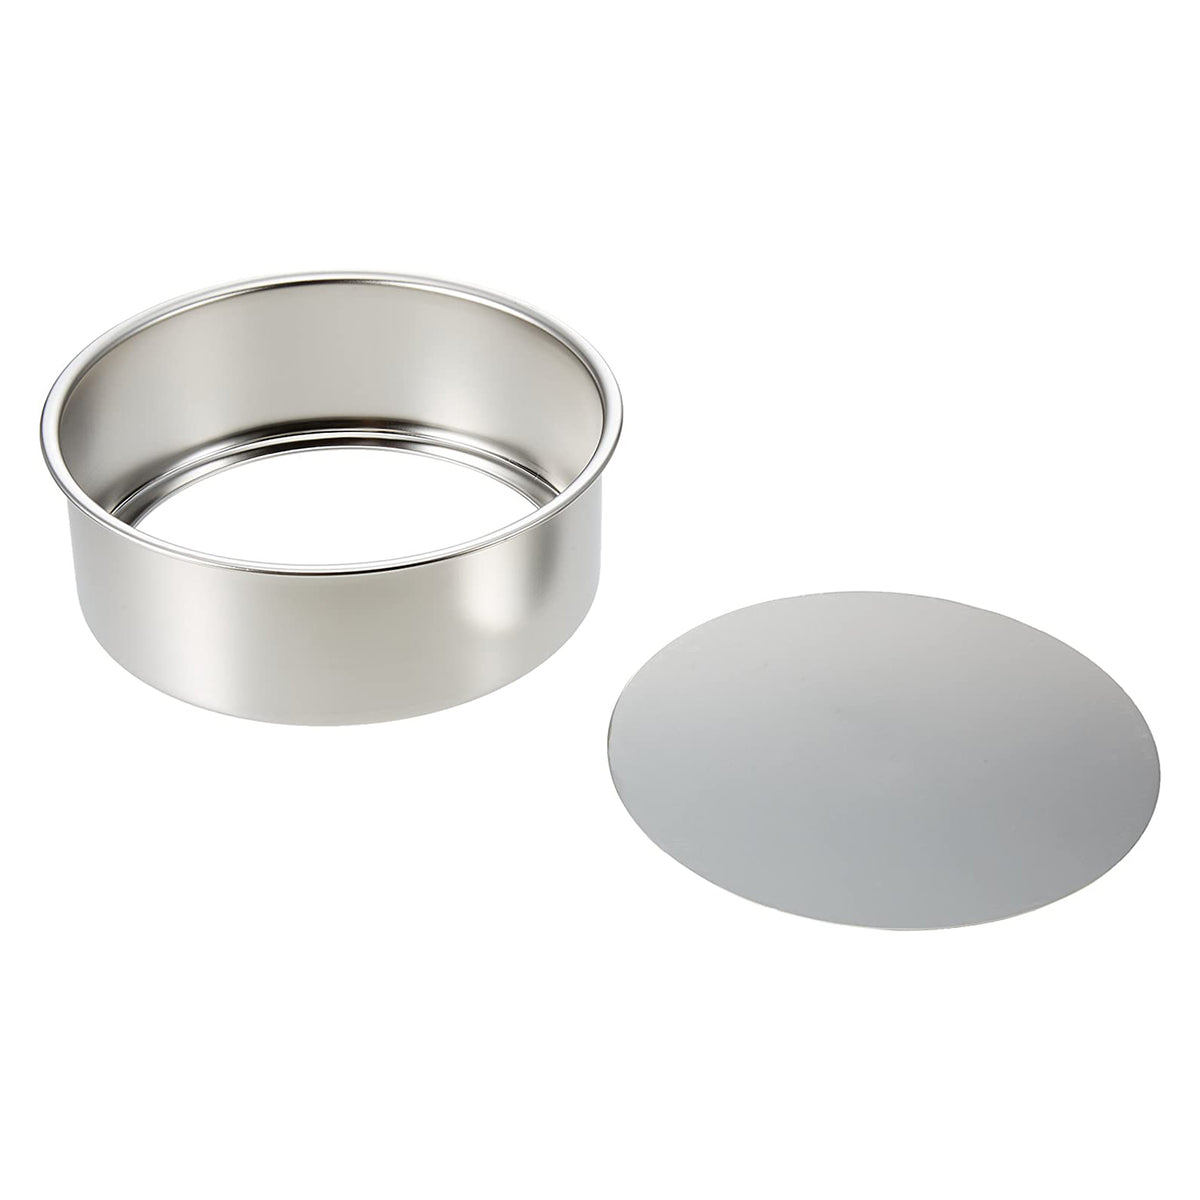 SHIMOTORI Stainless steel Round Cake Pan with Removable Bottom -  Globalkitchen Japan